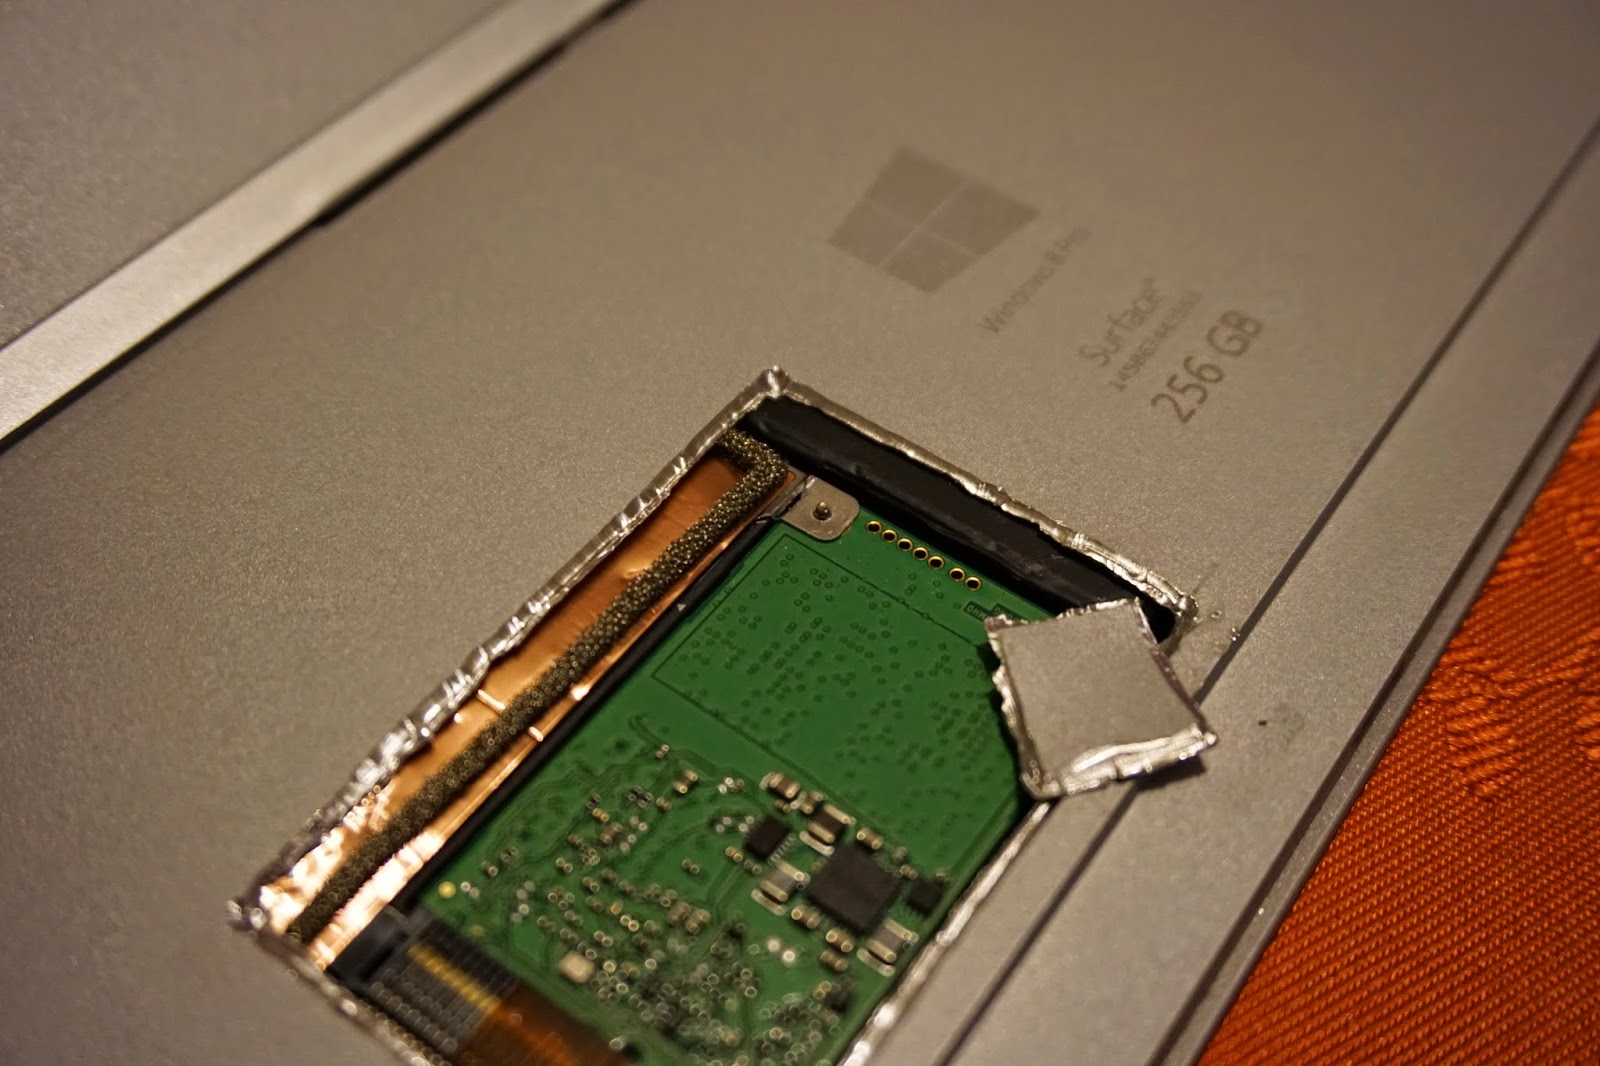 How To Install A 1 Tb Ssd In A Surface Pro 3 With A Power Drill